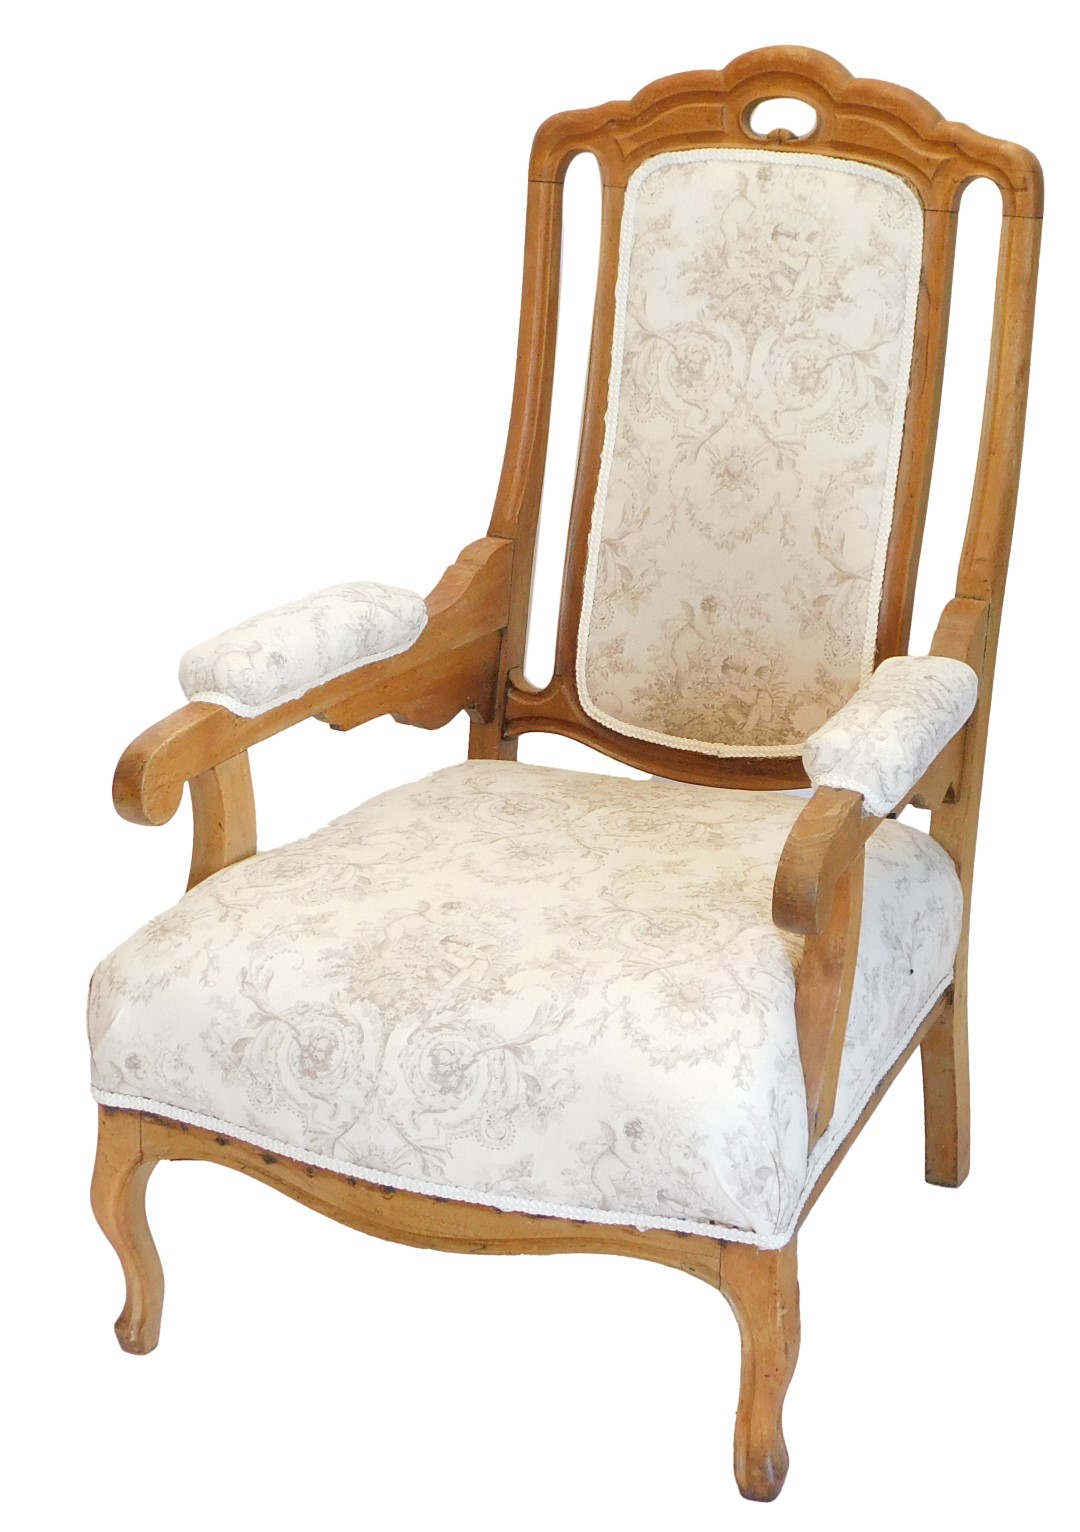 A 19thC continental walnut open armchair, with a padded back, armrest and seat, upholstered in toile